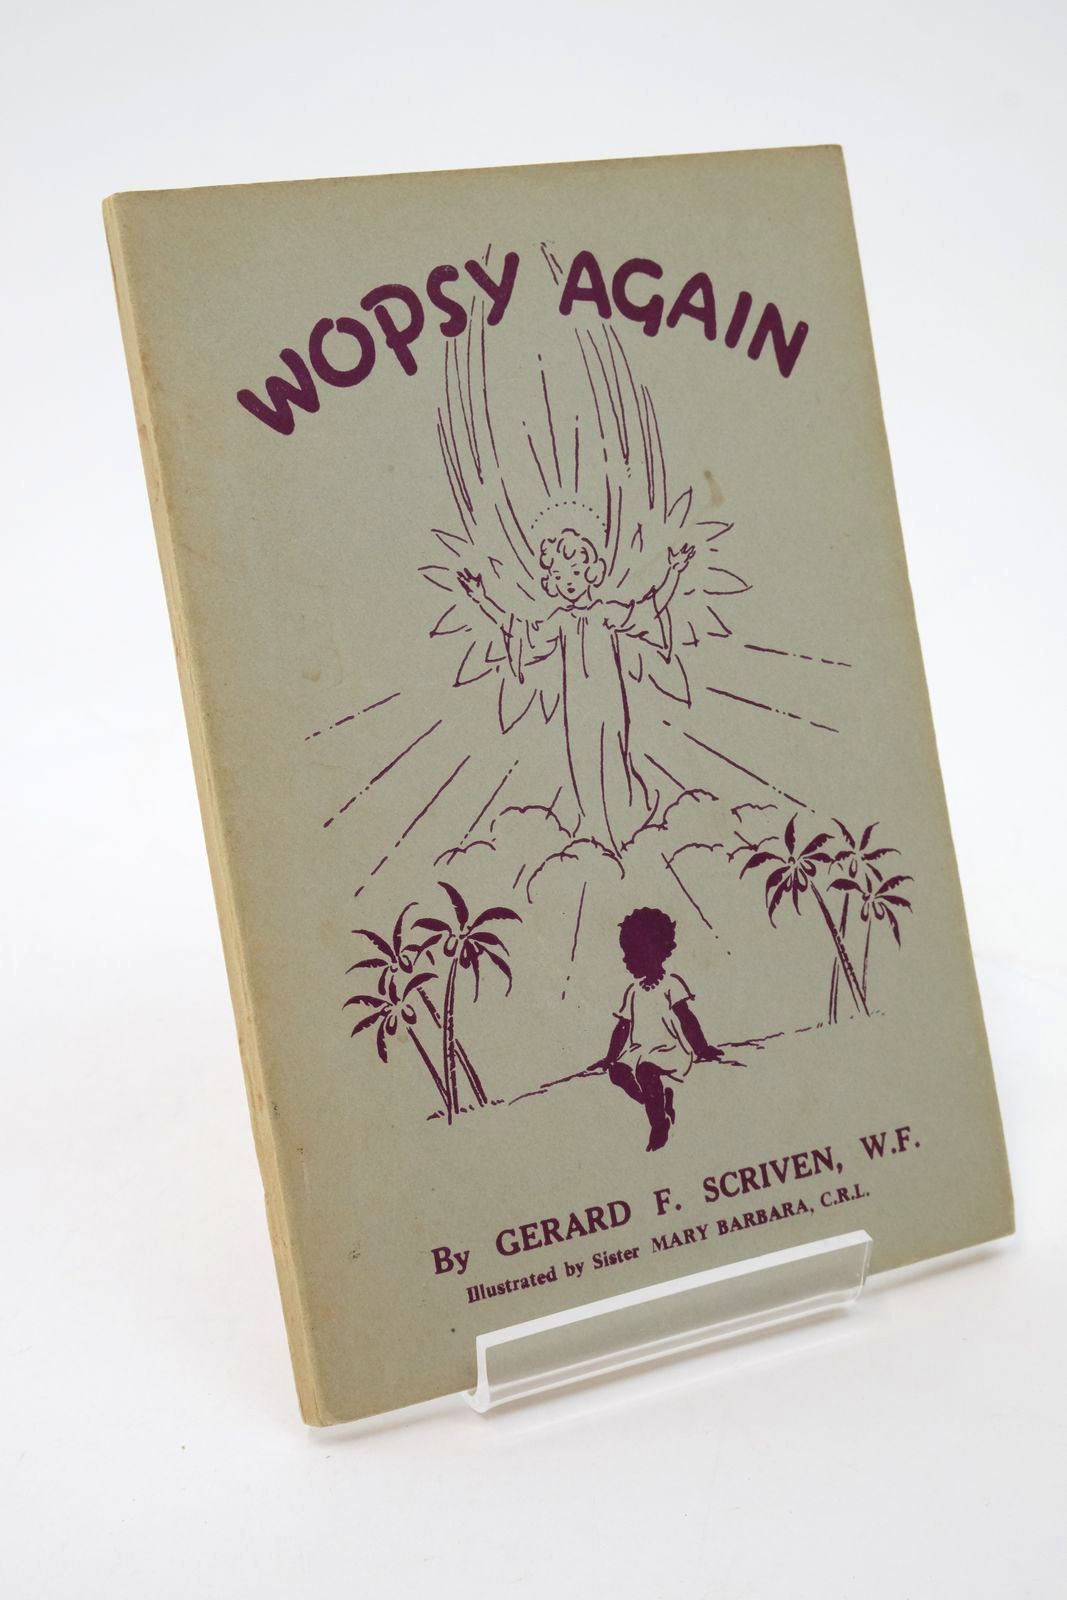 Photo of WOPSY AGAIN written by Scriven, Gerard F. illustrated by Barbara, Sister Mary published by Samuel Walker Ltd (STOCK CODE: 1322666)  for sale by Stella & Rose's Books